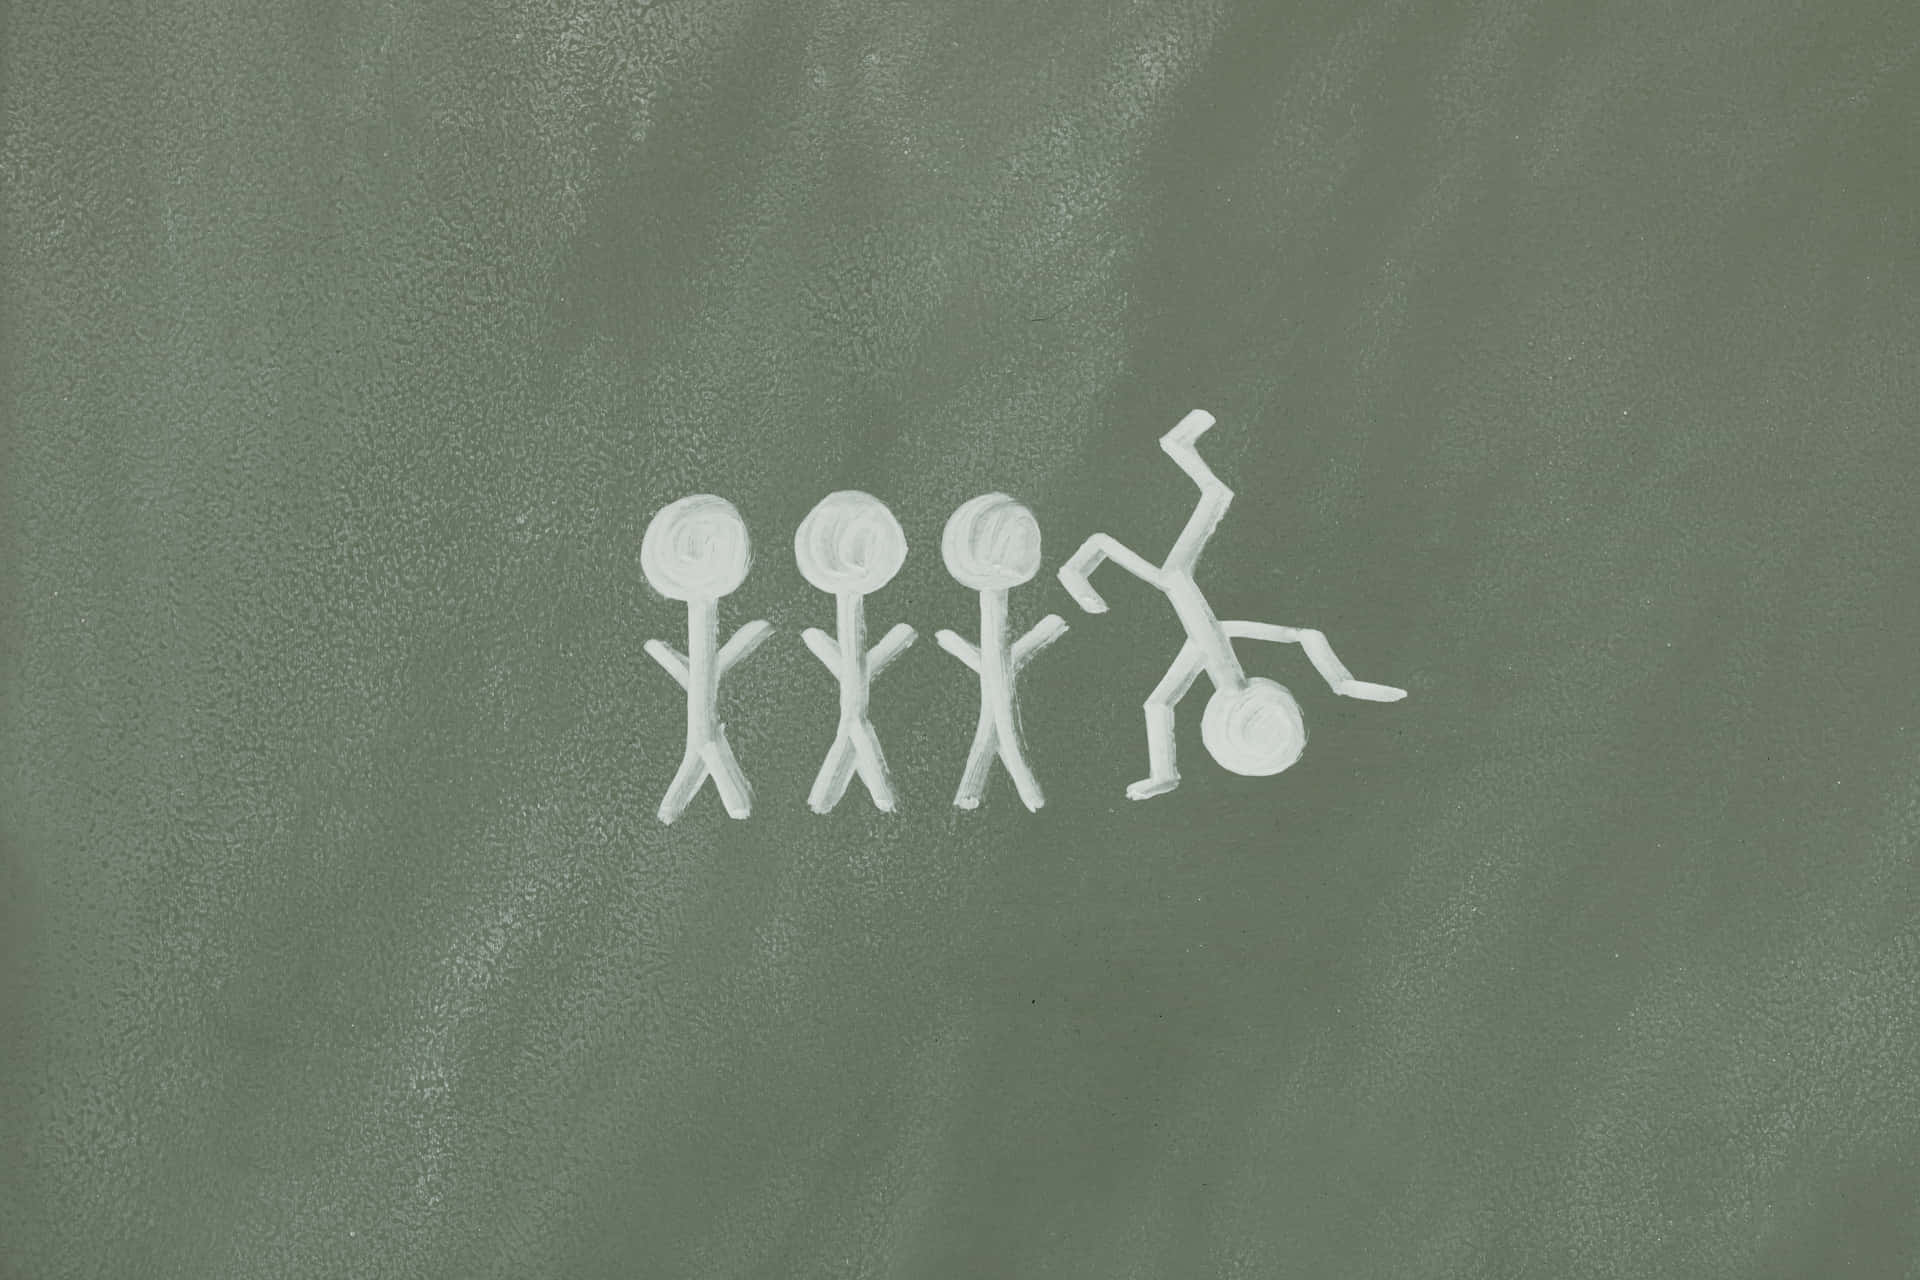 A Chalkboard With A White Drawing Of People